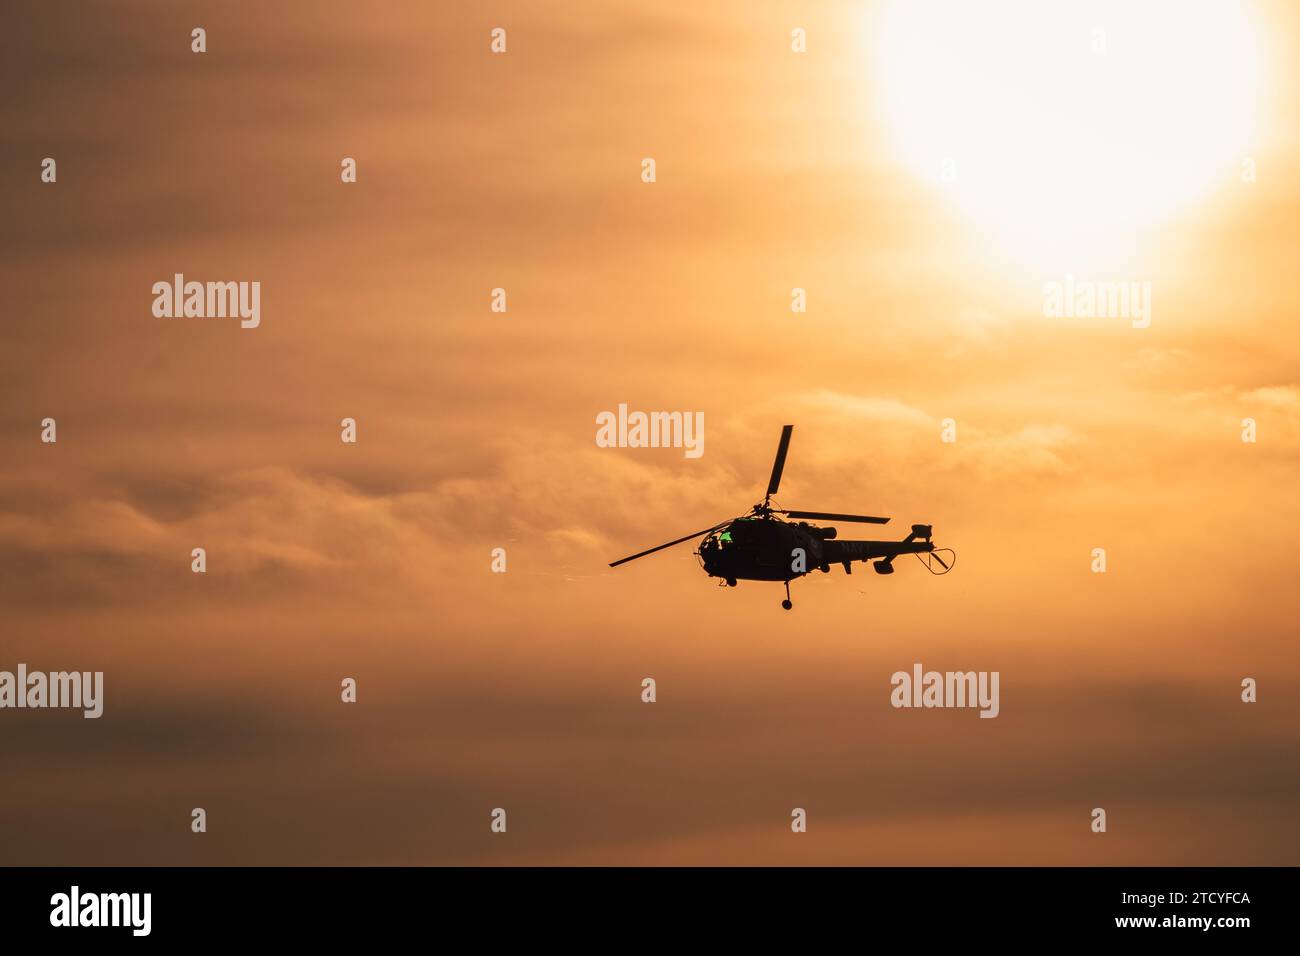 An Indian navy helicopter at Navy Day celebrations Stock Photo